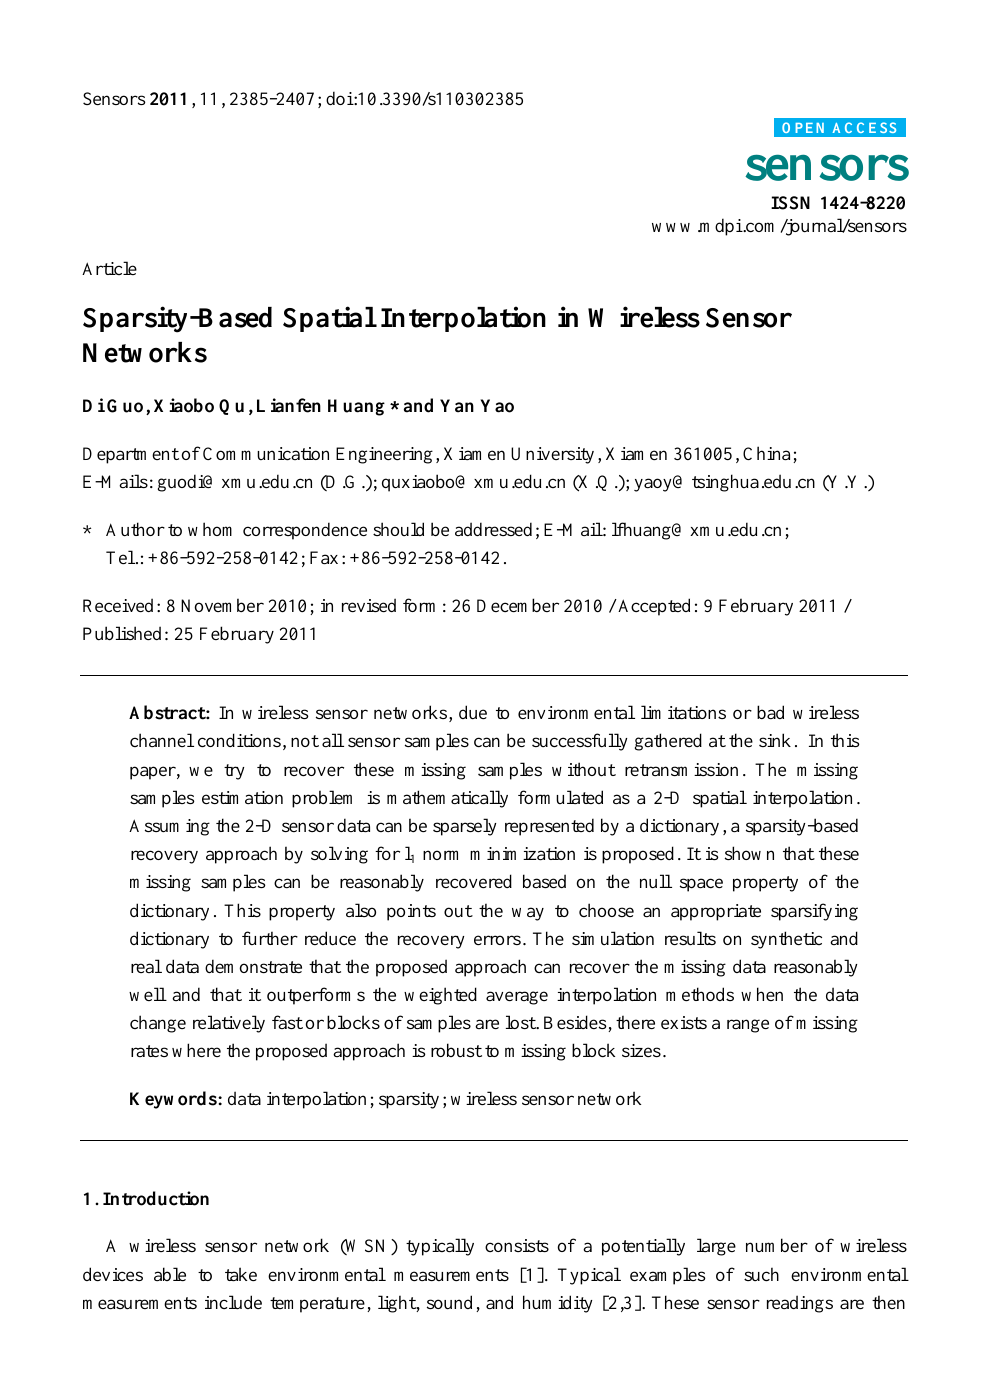 Sparsity Based Spatial Interpolation In Wireless Sensor Networks Topic Of Research Paper In Electrical Engineering Electronic Engineering Information Engineering Download Scholarly Article Pdf And Read For Free On Cyberleninka Open Science Hub